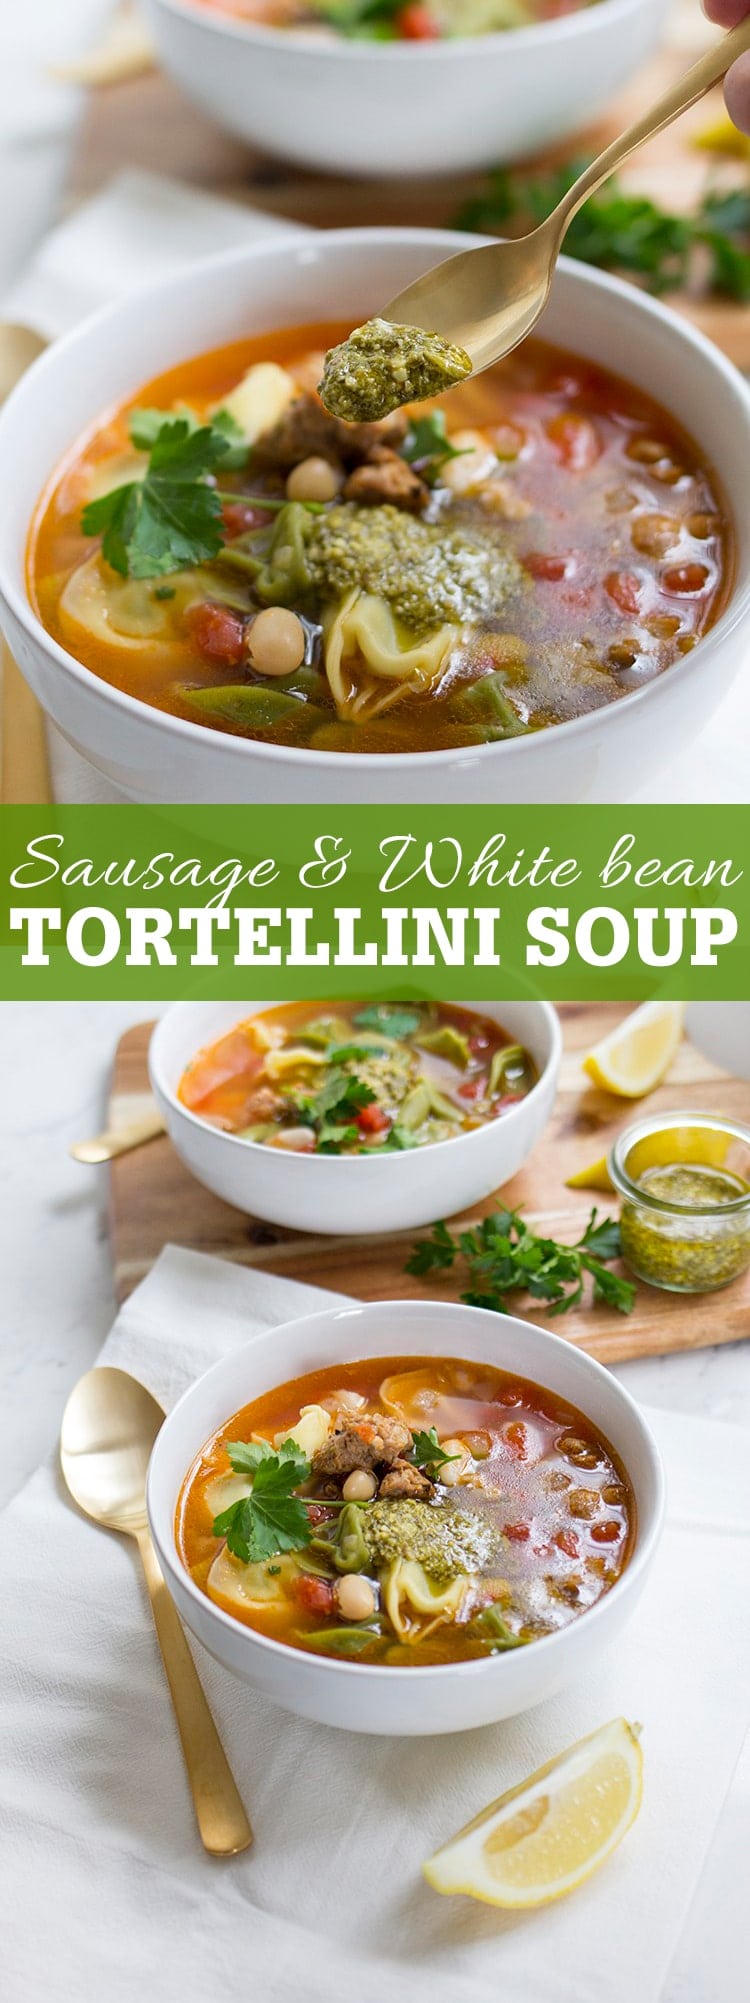 Sausage and white bean tortellini soup with pesto is an easy and comforting weeknight meal!